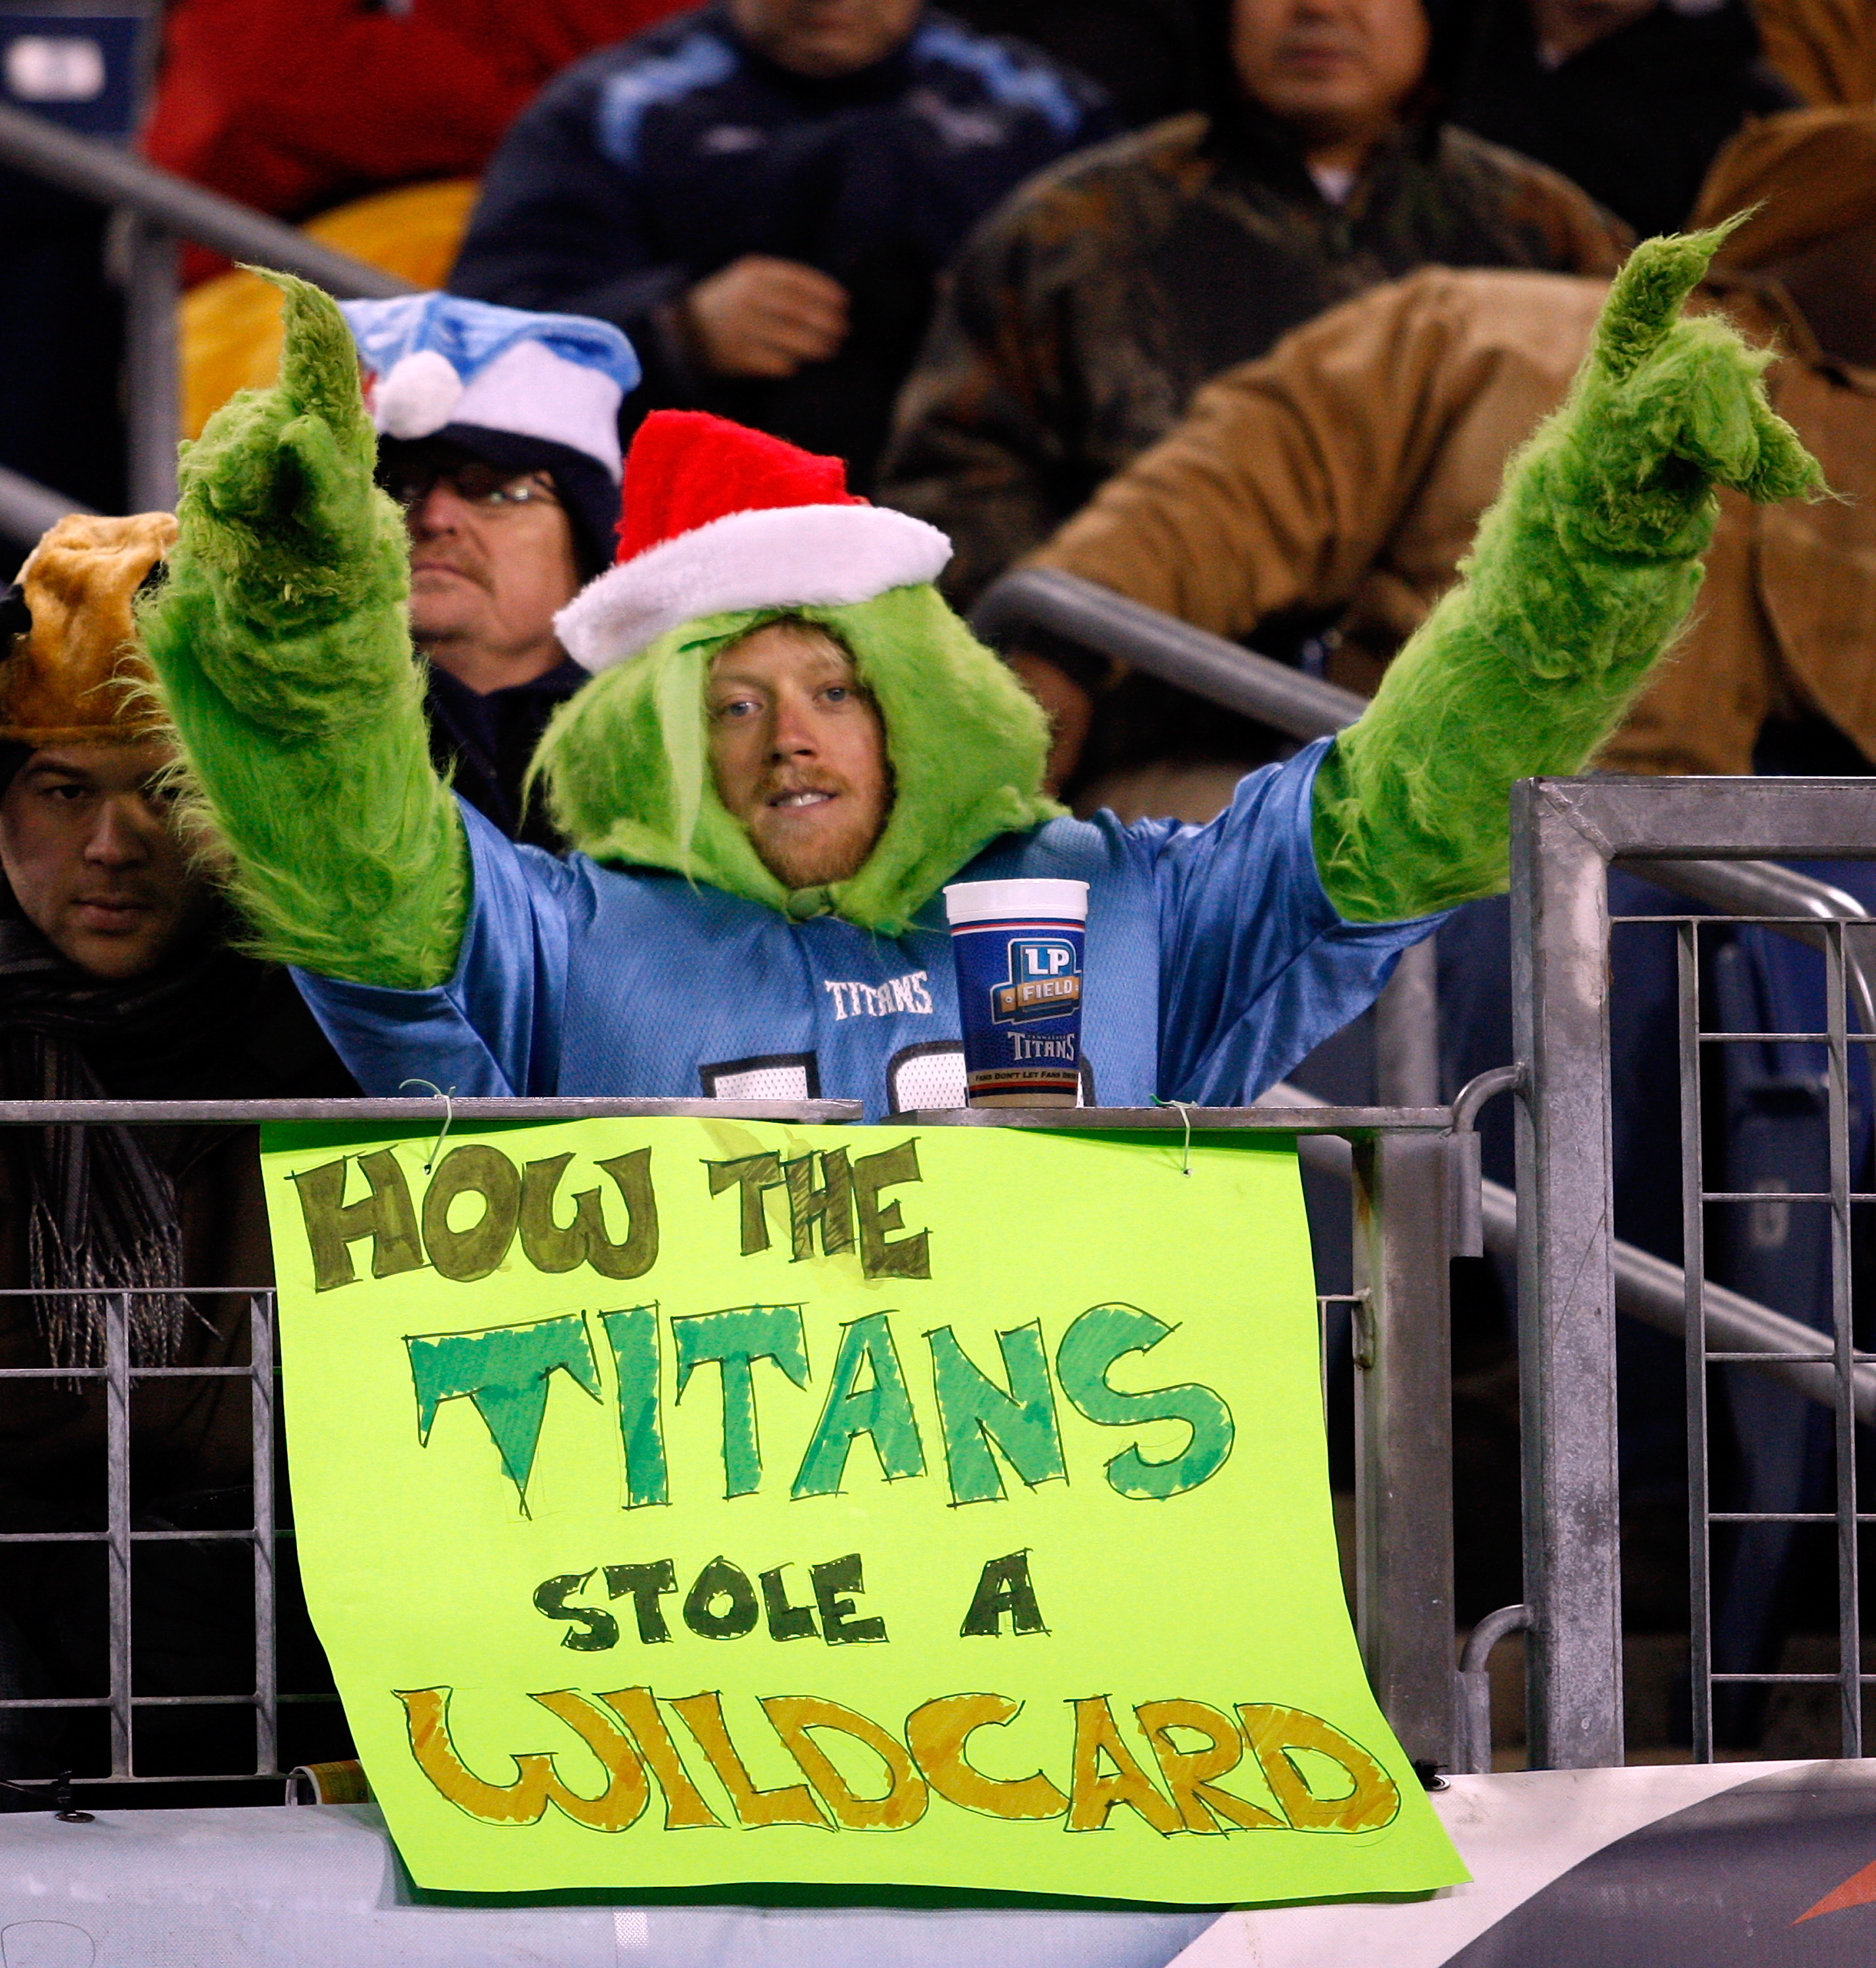 Die-Hard or Fair-Weather Fans? Ranking All 32 NFL Fan Bases